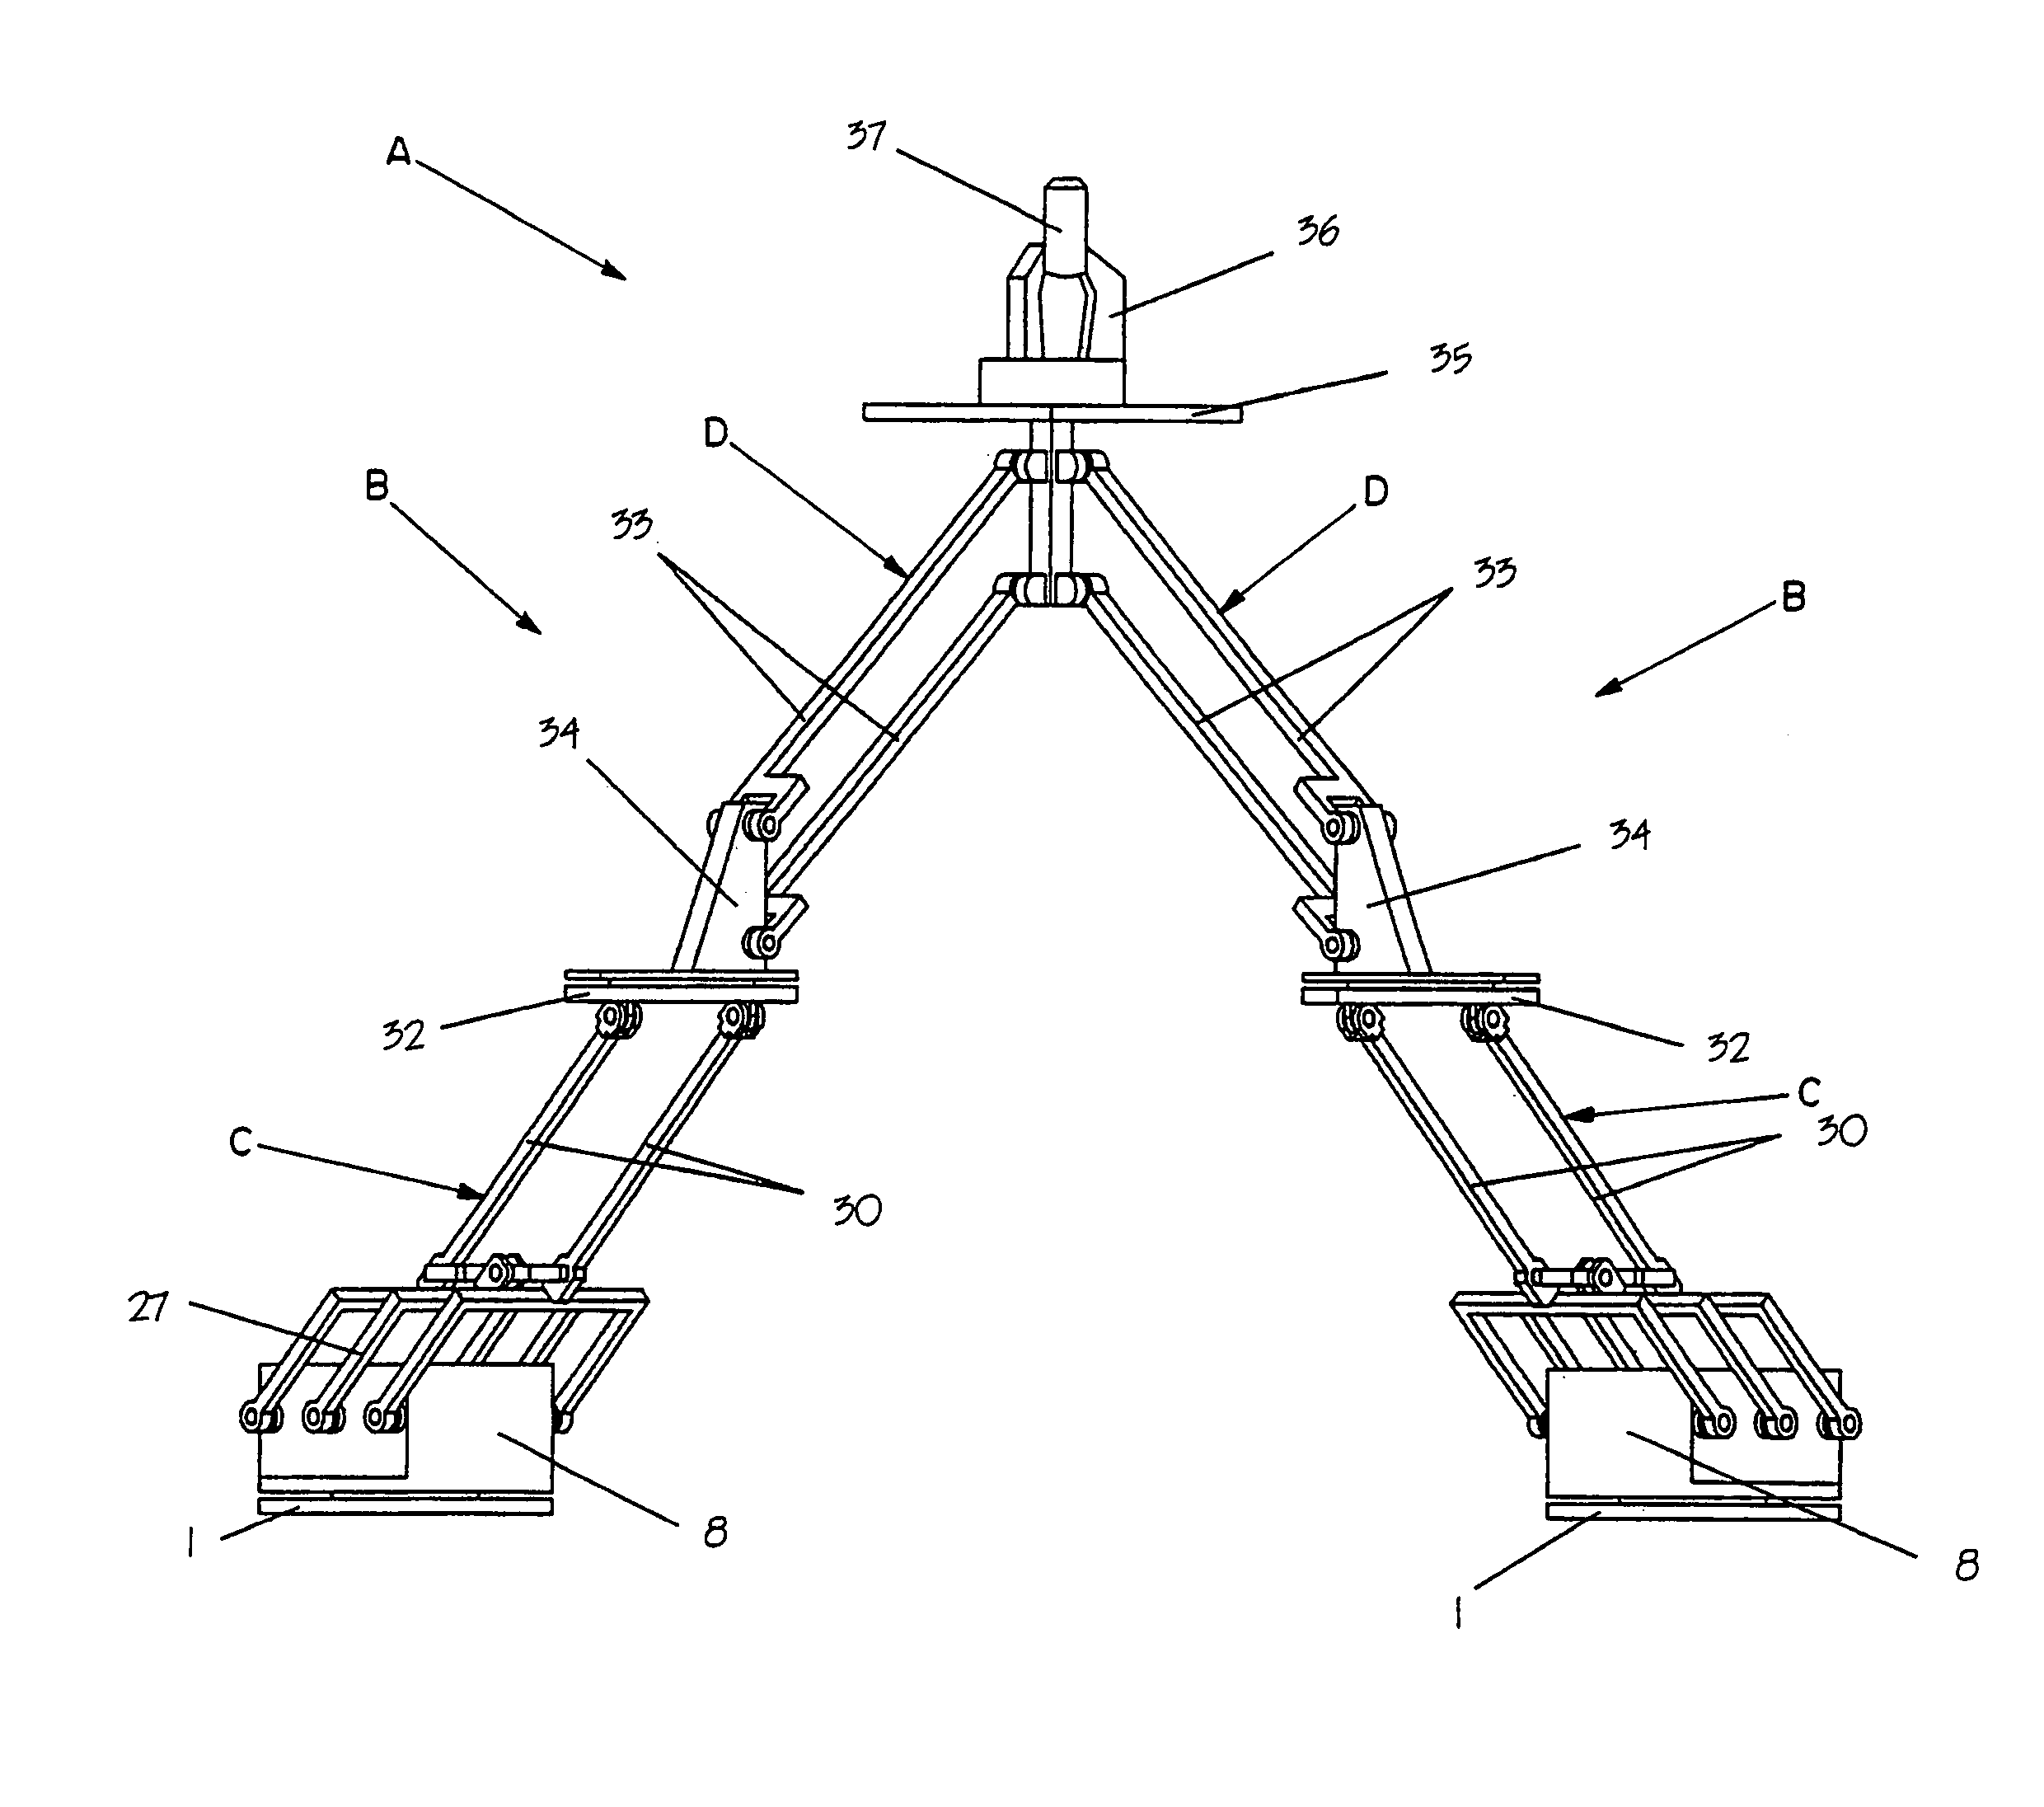 Four-degree-of-freedom parallel manipulator for producing Schönflies motions